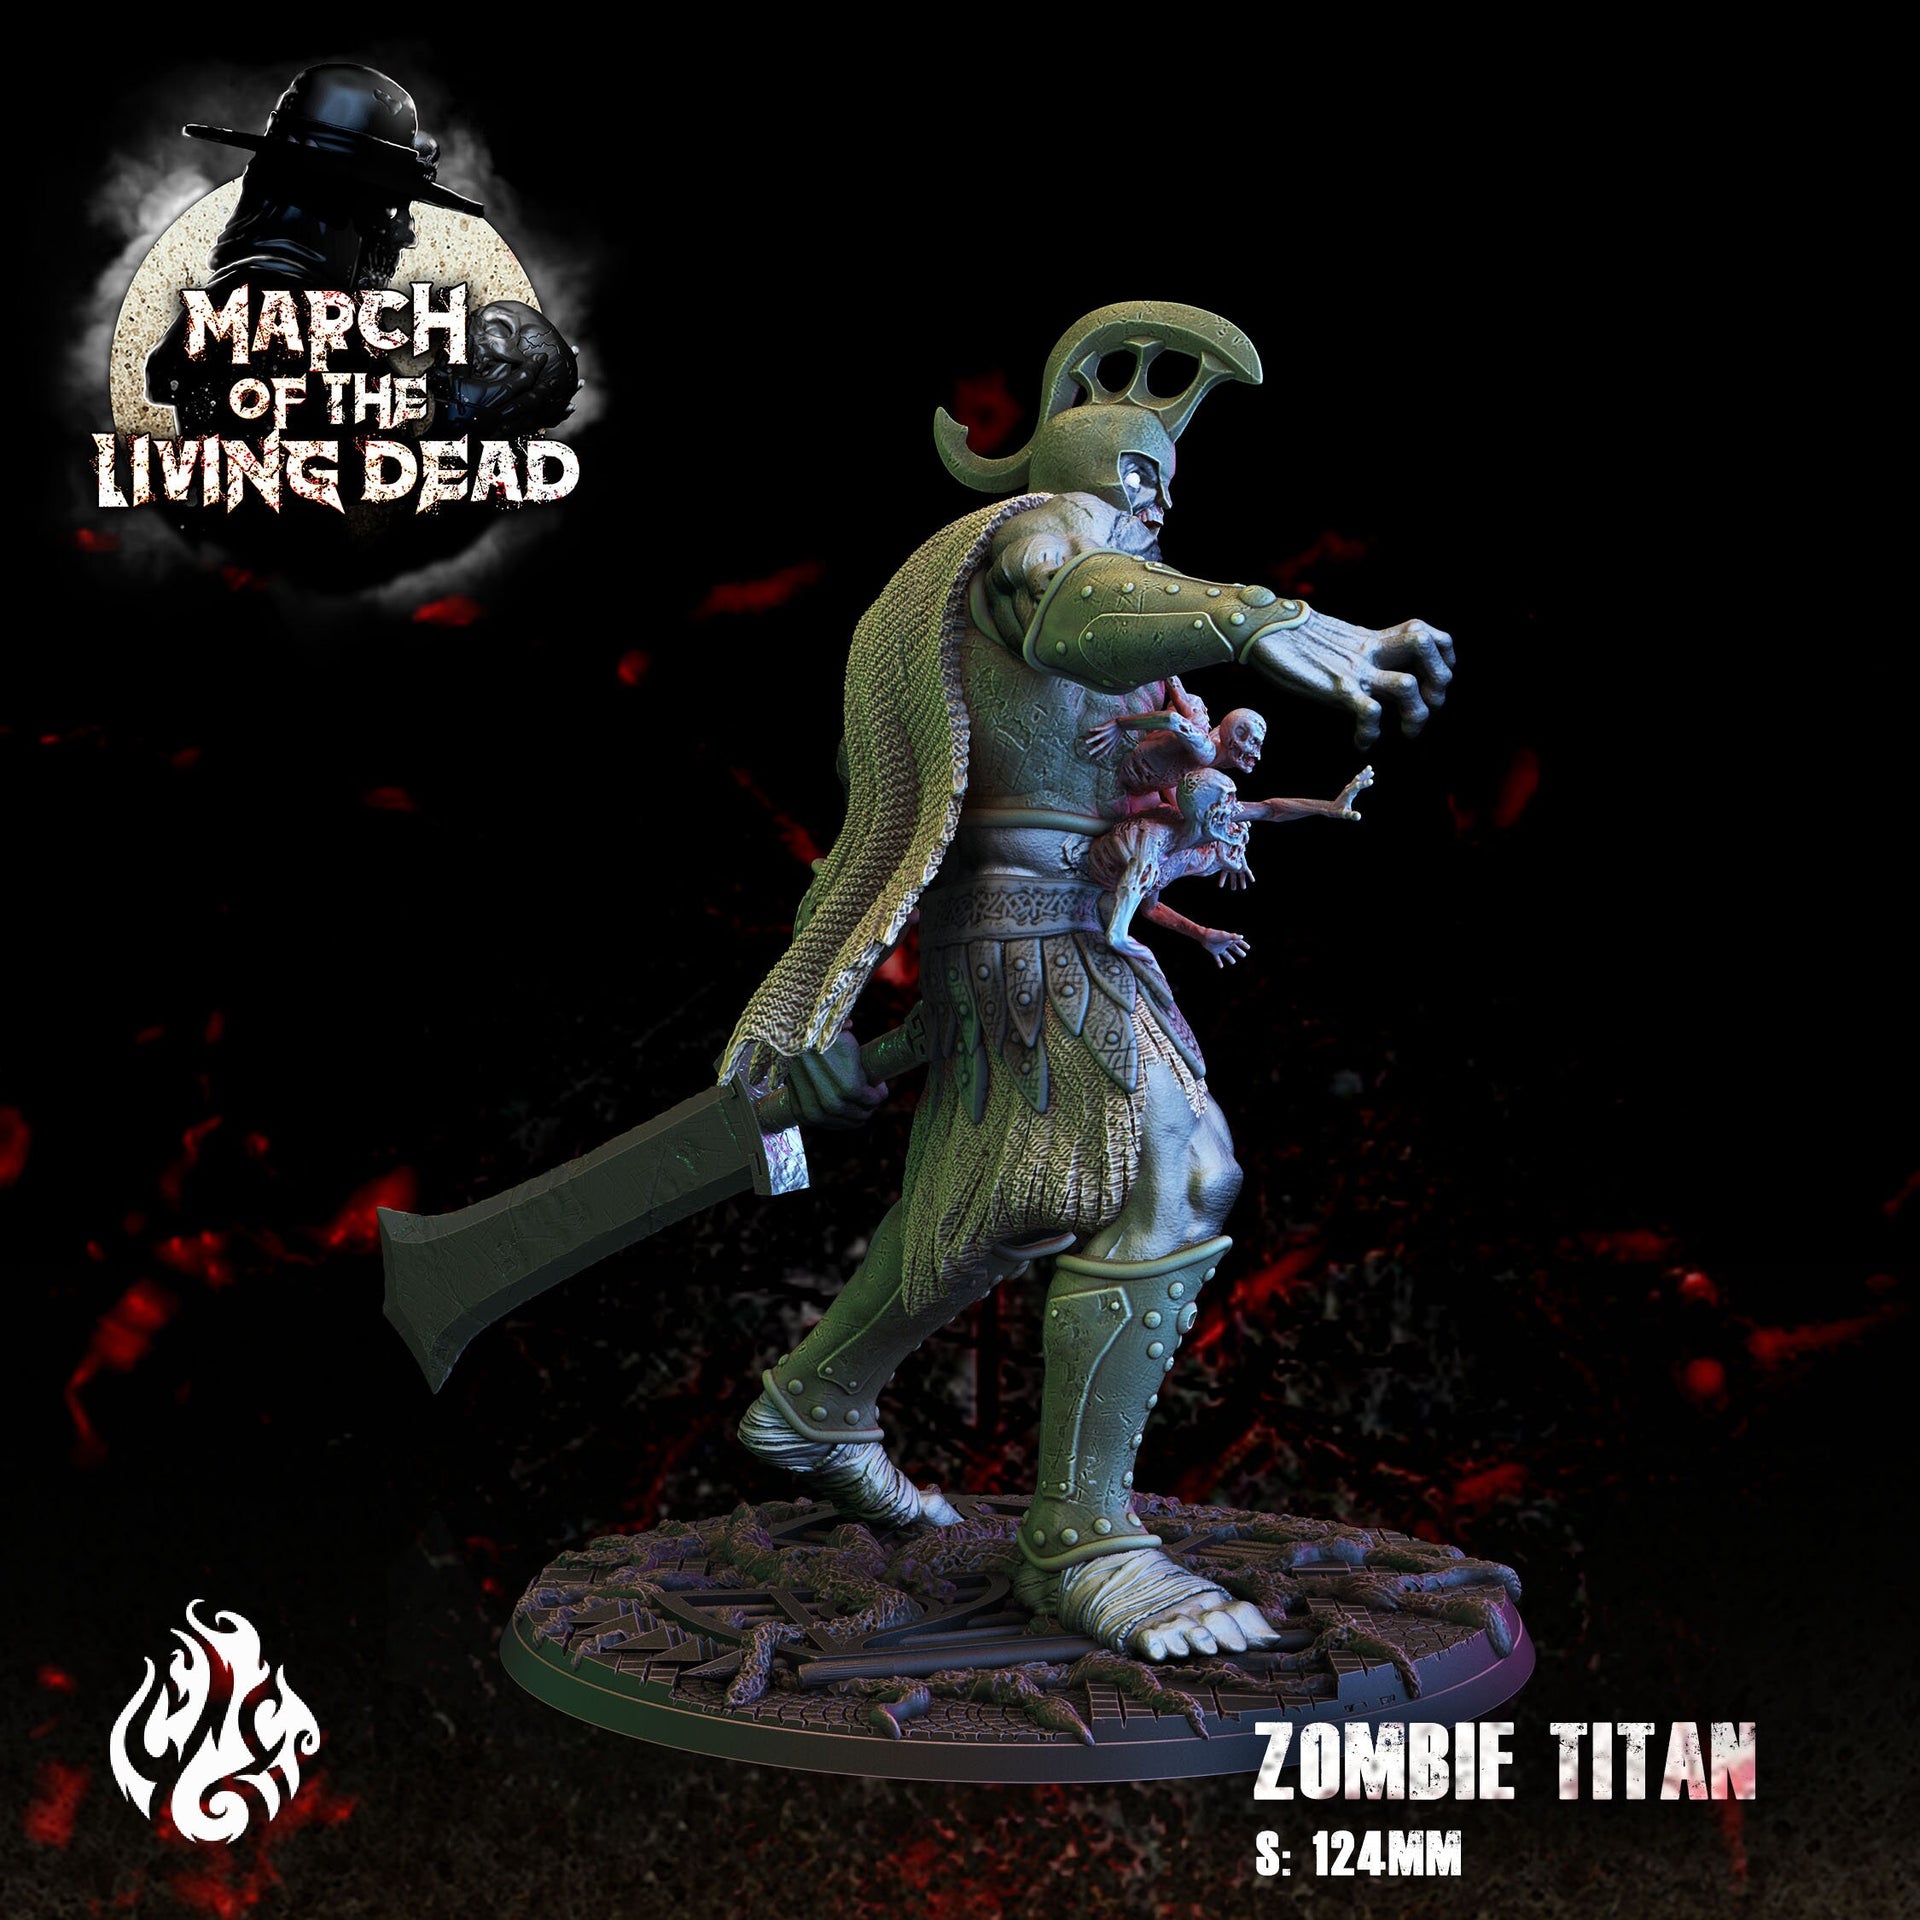 Zombie Titan - Crippled God Foundry - March of the Living Dead 